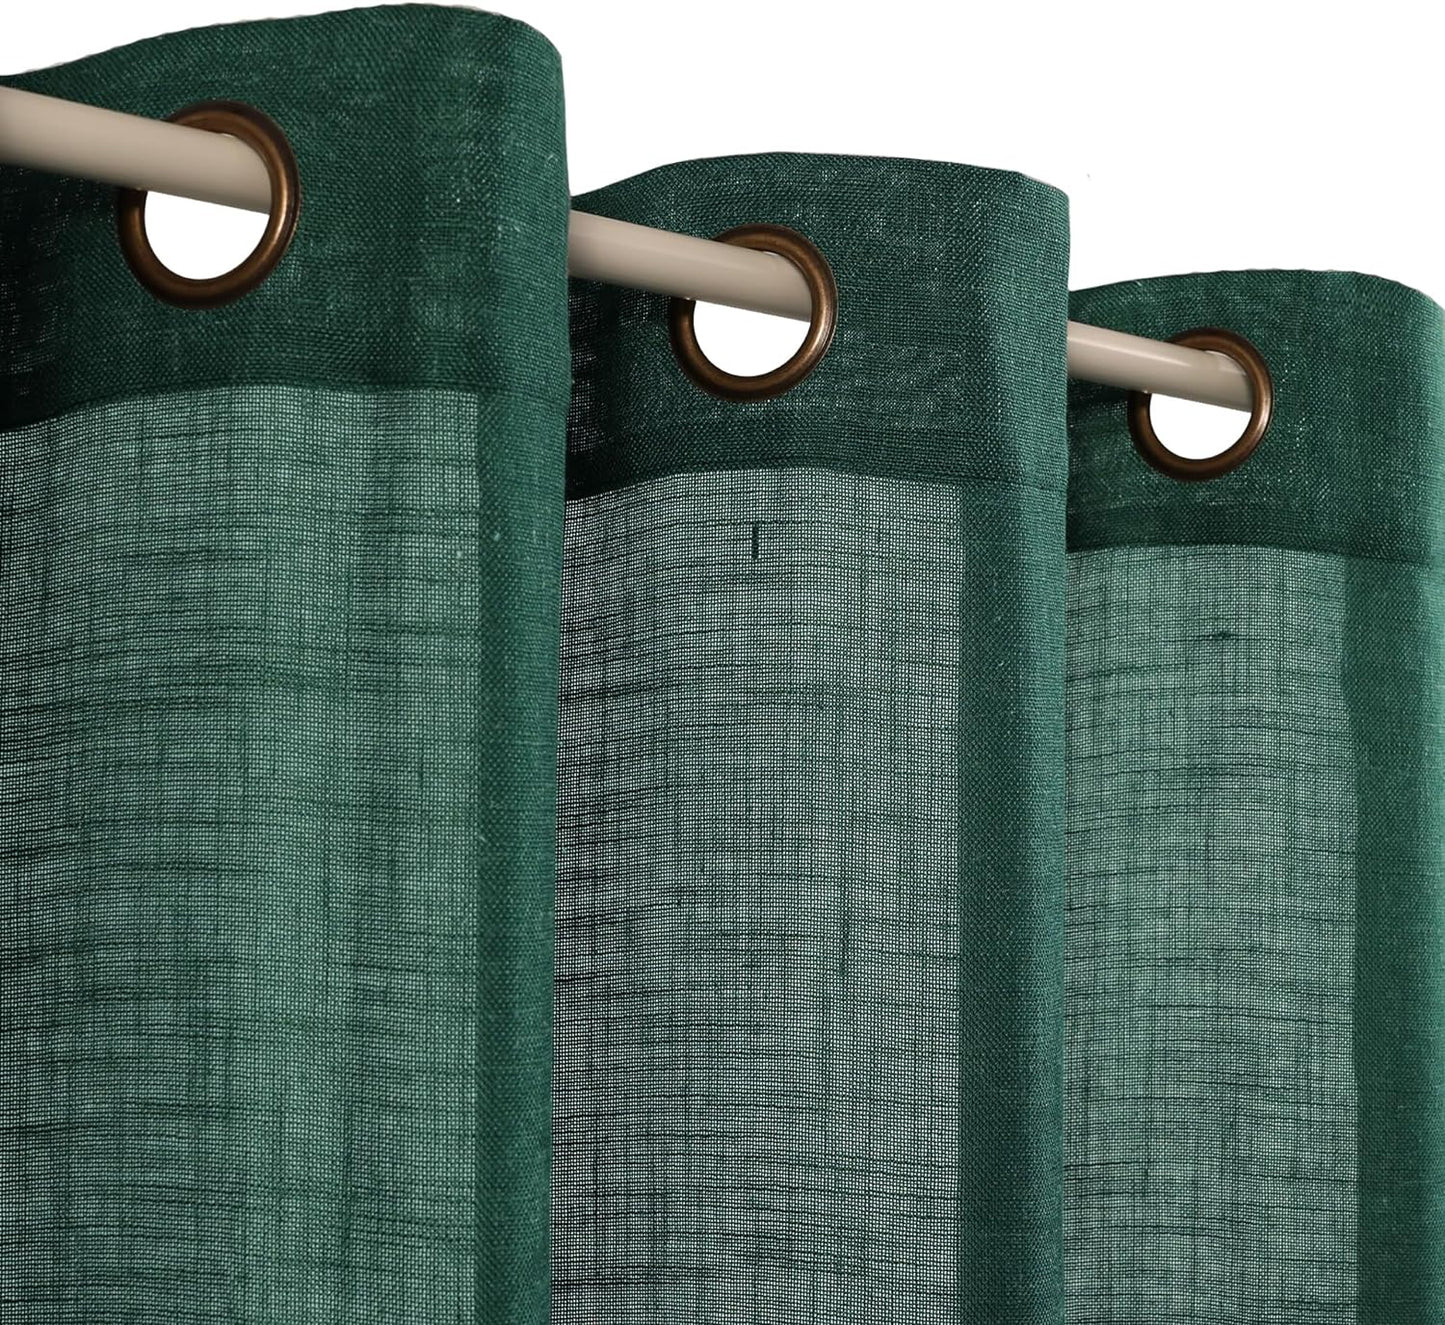 VOILYBIRD Palma Light Filtering Drapes Natural Linen Blended Semi Sheer Curtains 84 Inches Long Bronze Grommet for Bedroom (Natural, 52" W X 84" L, 2 Panels)  VOILYBIRD Forest Green 52"W X 96"L 